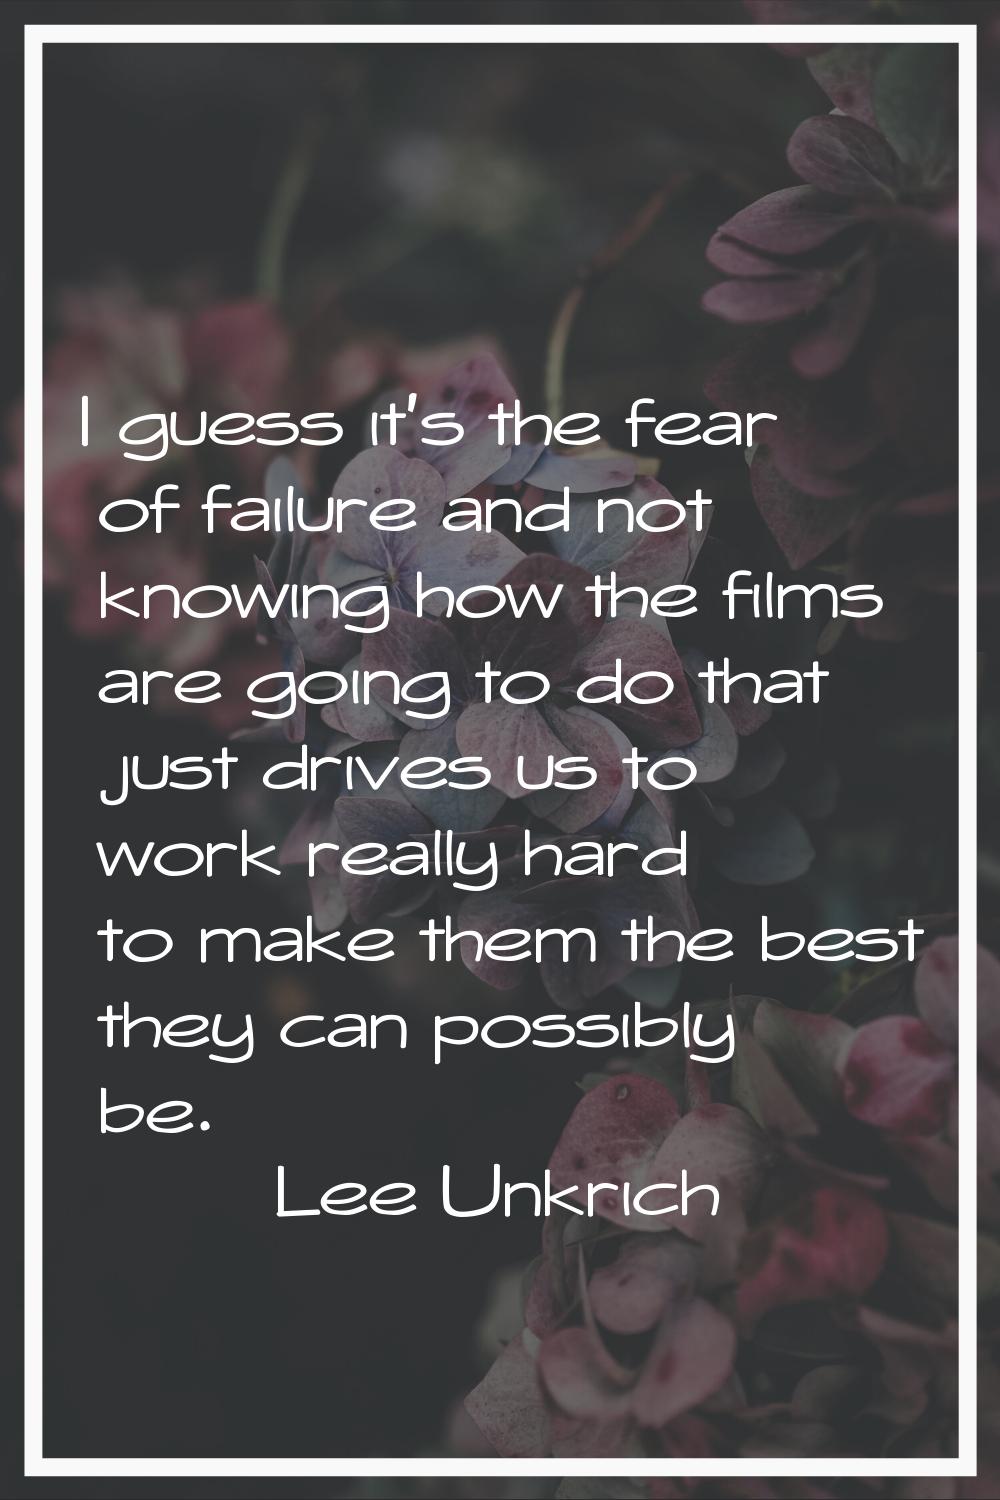 I guess it's the fear of failure and not knowing how the films are going to do that just drives us 